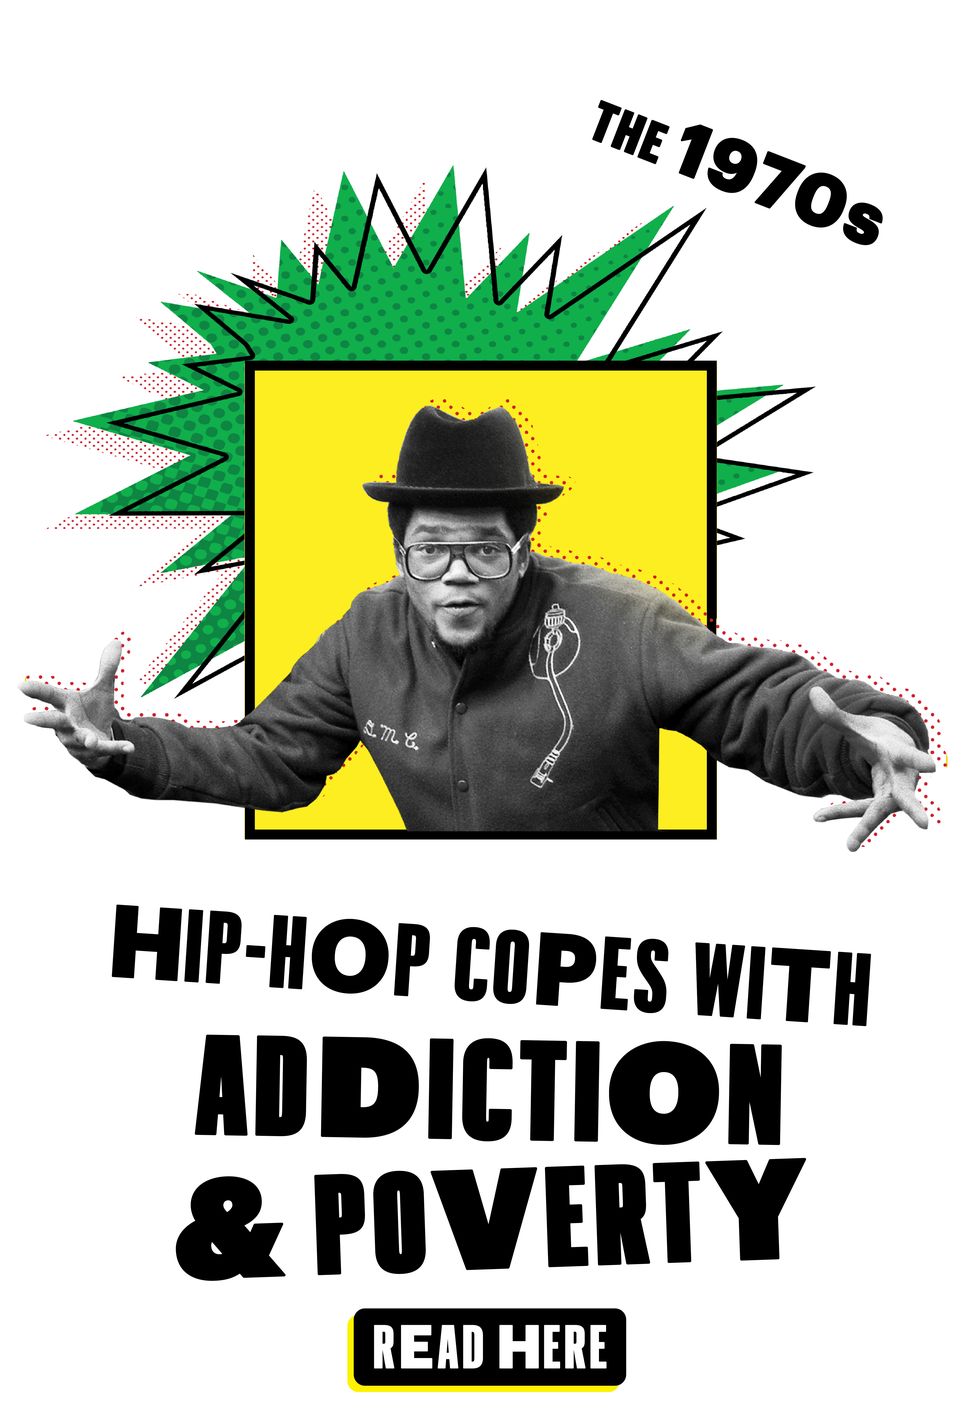 1970s hiphop copes with addiction poverty